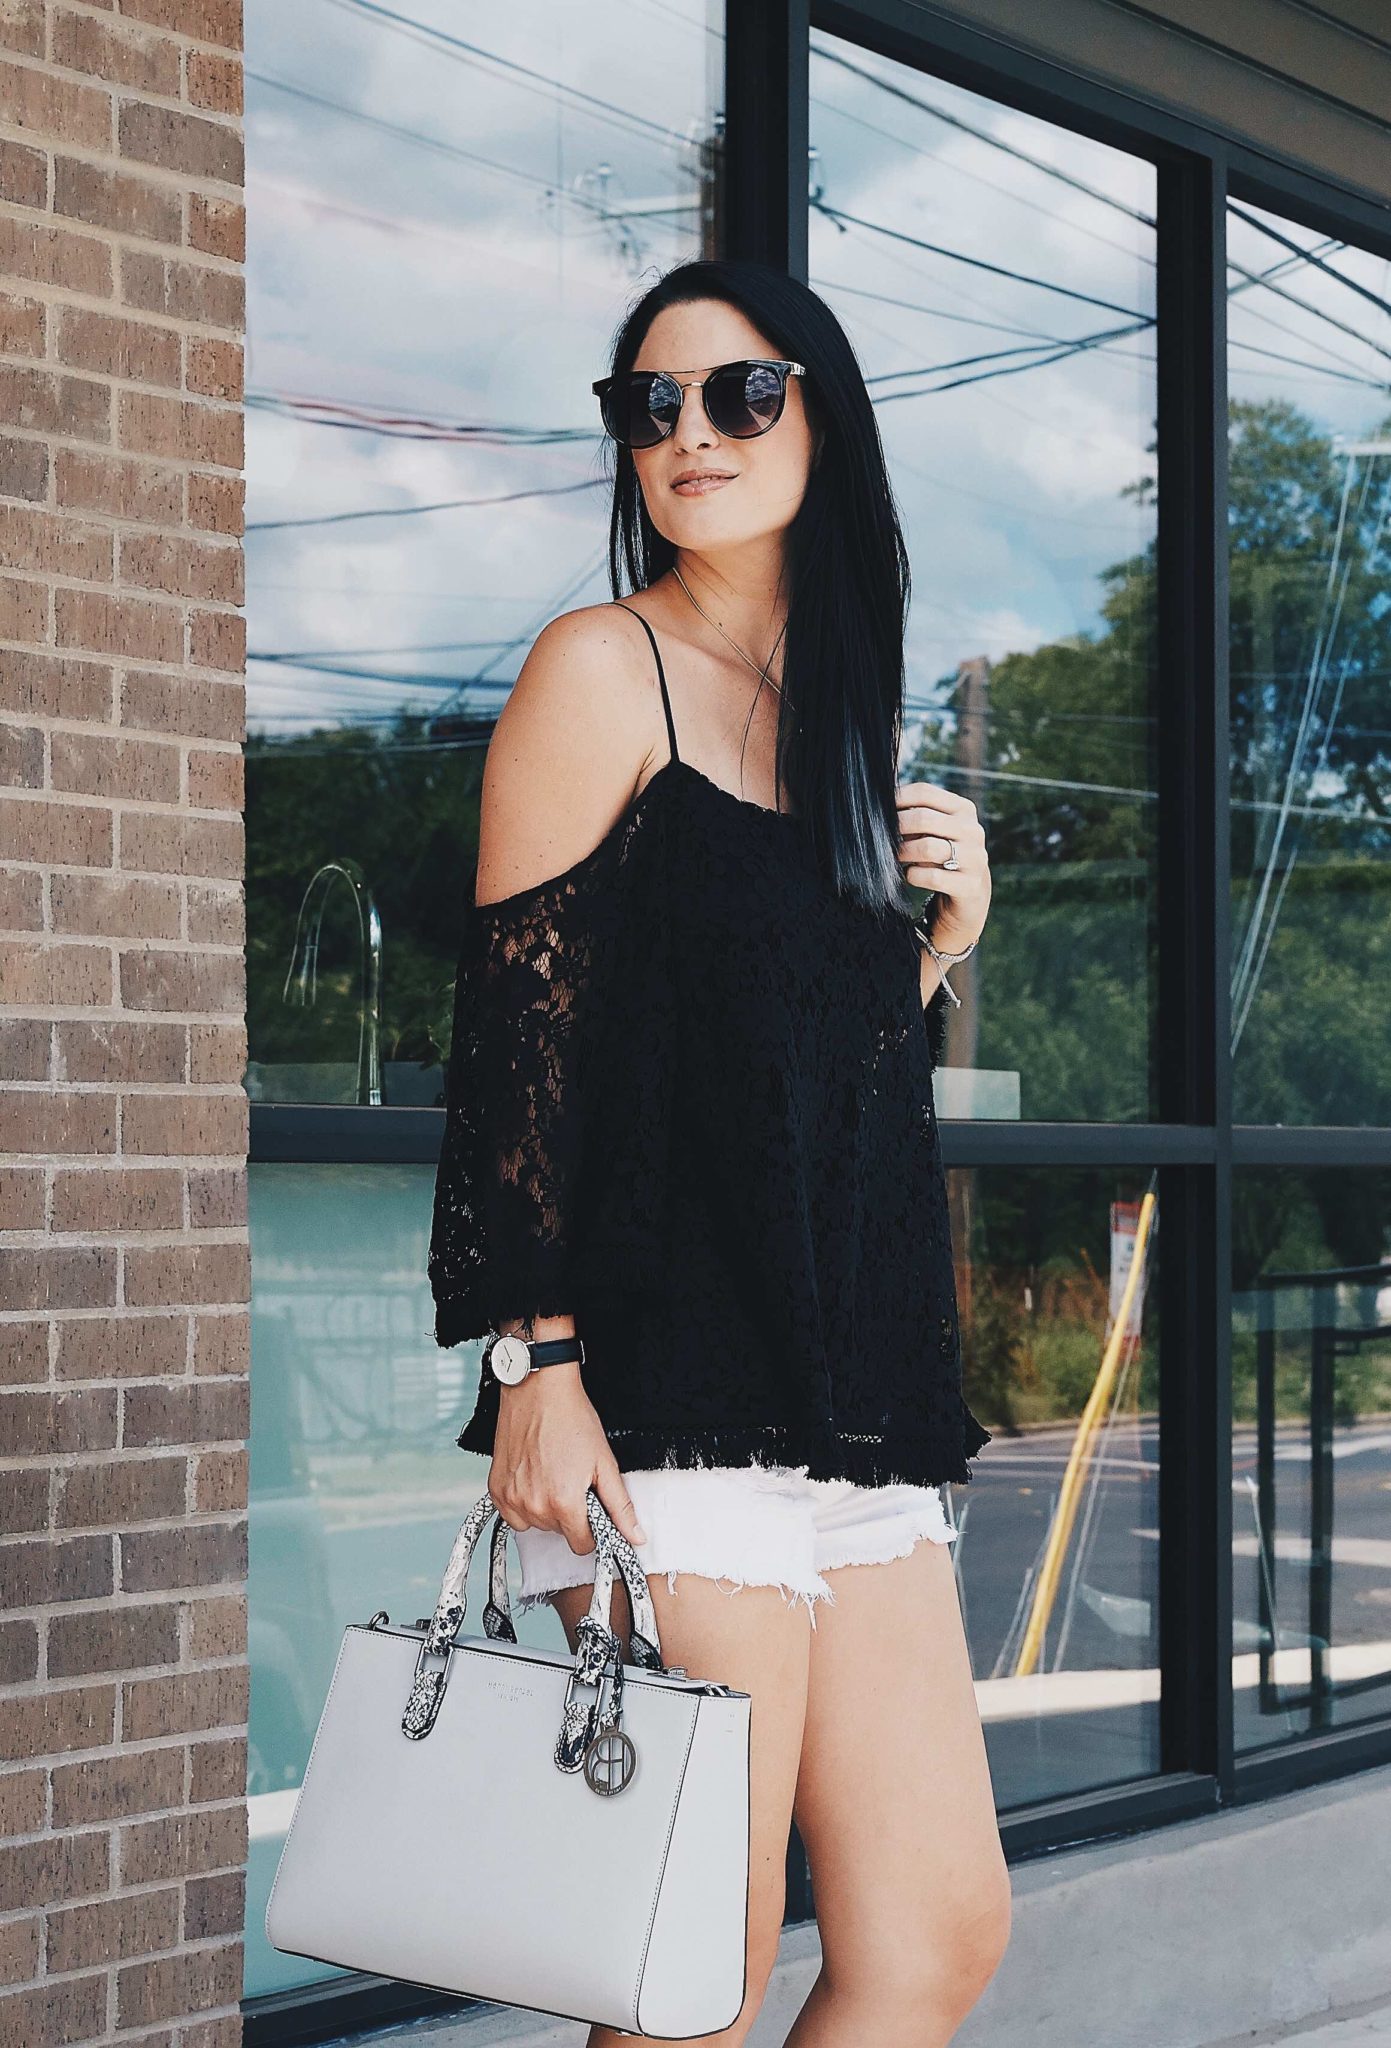 DTKAustin shares a beautiful black Bailey44 lace cold shoulder top, paired with white cutoff shorts, a Henri Bendel bag and Splendid black heels. Click for more information and photos. | how to style a cold shoulder top | how to wear a cold shoulder top | cold shoulder top style tips | summer fashion tips | summer outfit ideas | summer style tips | what to wear for summer | warm weather fashion | fashion for summer | style tips for summer | outfit ideas for summer || Dressed to Kill